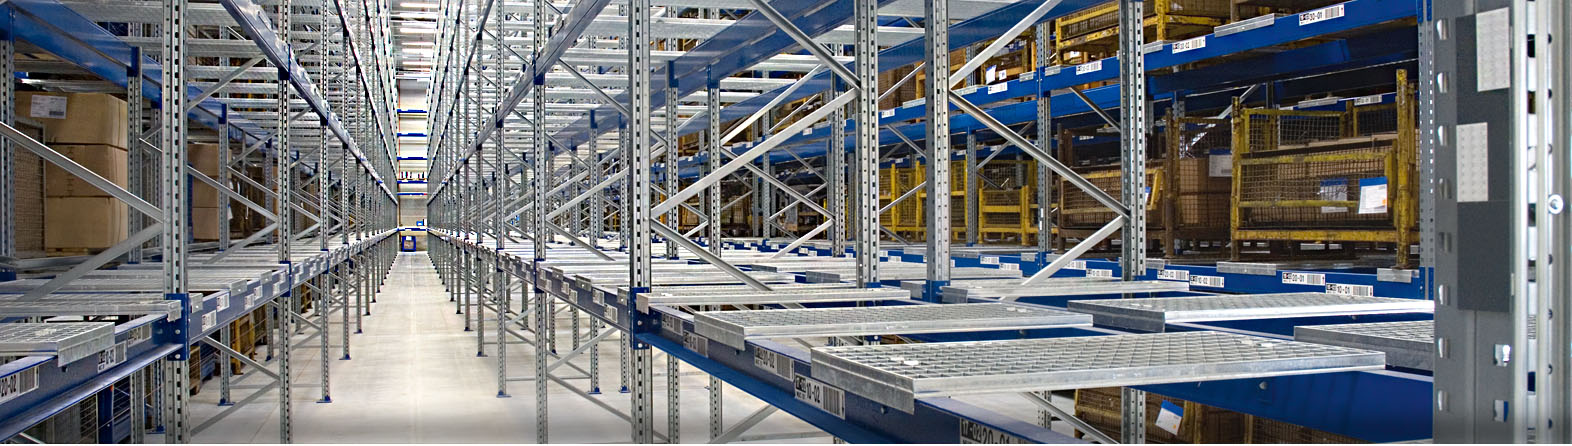 Warehouses with Selective Pallet Rack. Quality Selective Pallet Rack. SSI Schaefer. www.schaefershelving.com